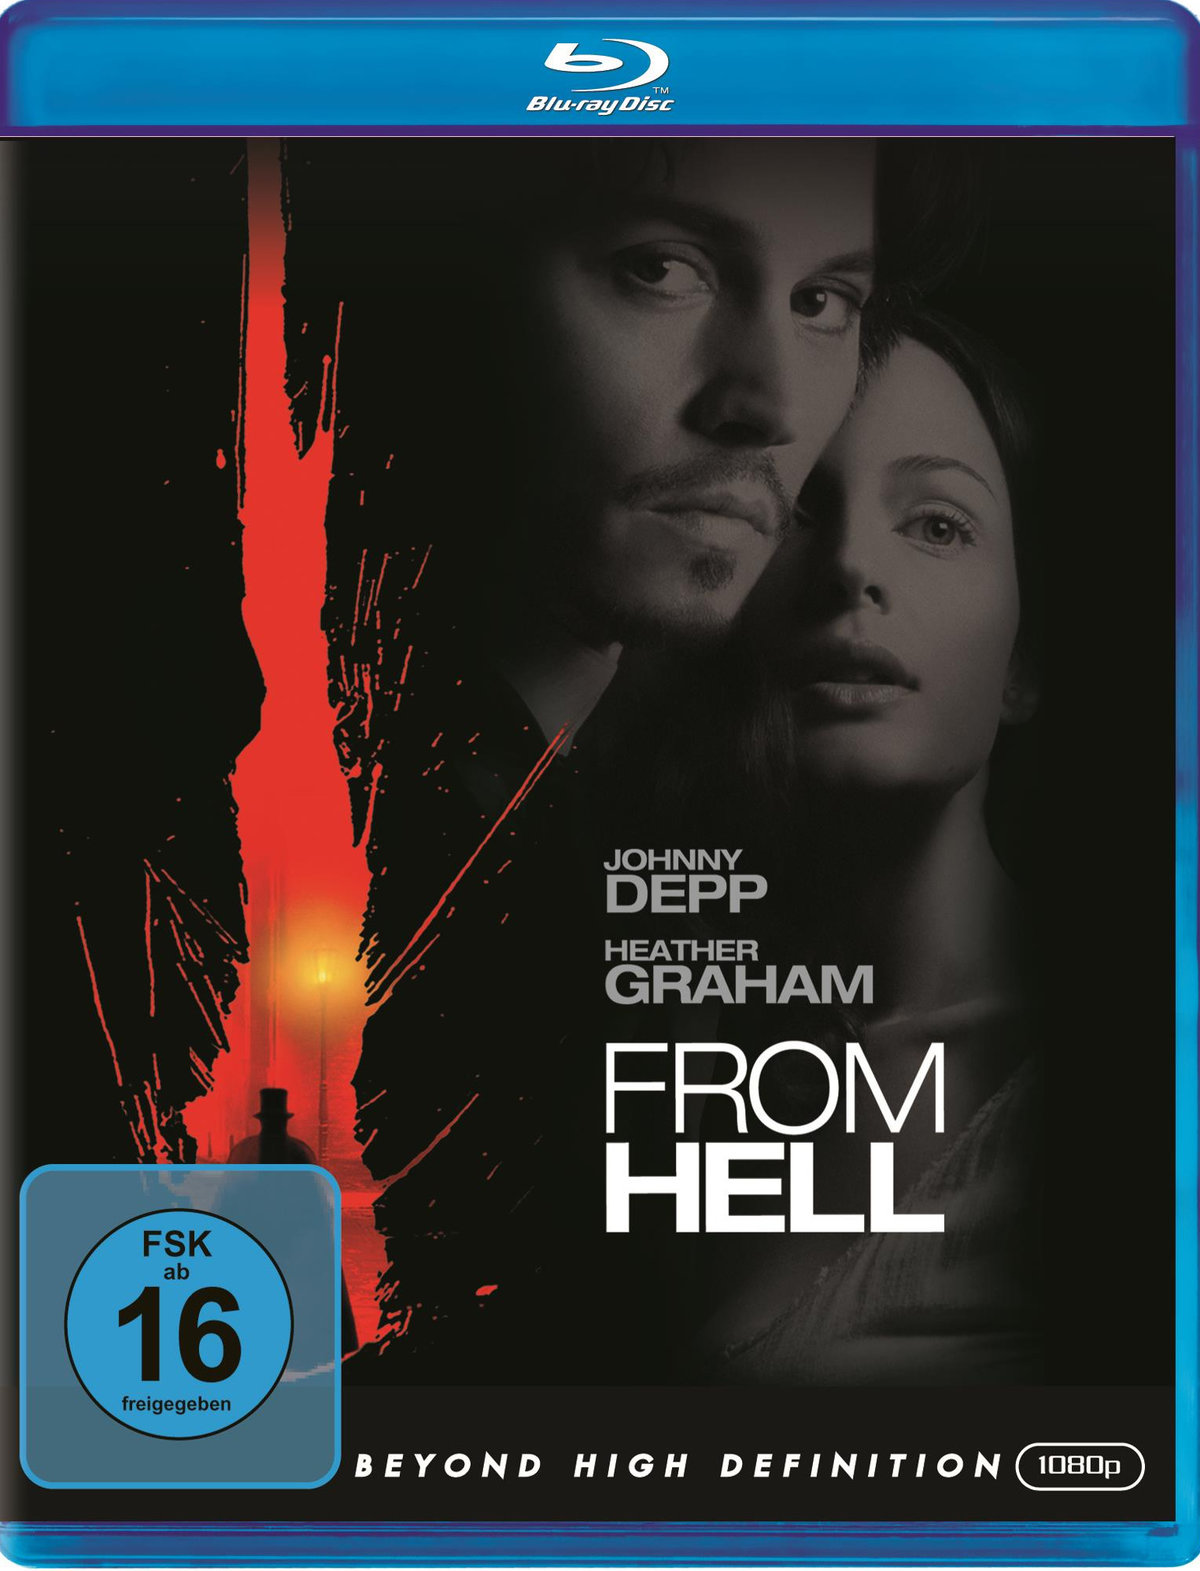 From Hell (blu-ray)